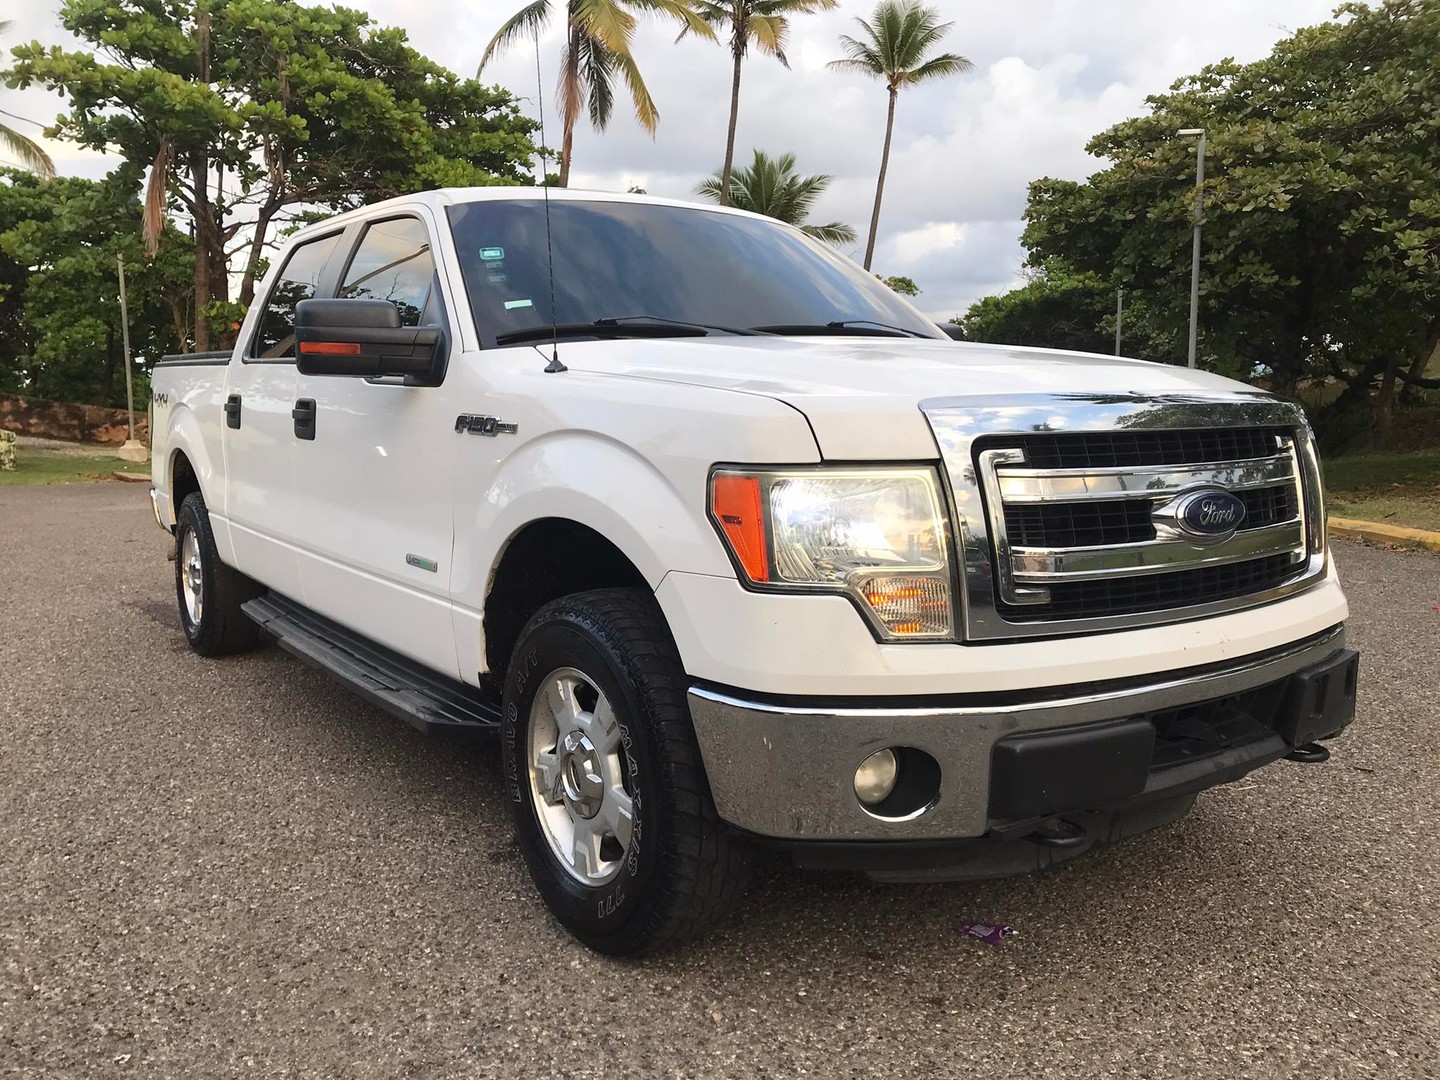 jeepetas y camionetas - Se Vende Ford F150 2014 Doble Cabina Ecoboost inf whatsapp  5